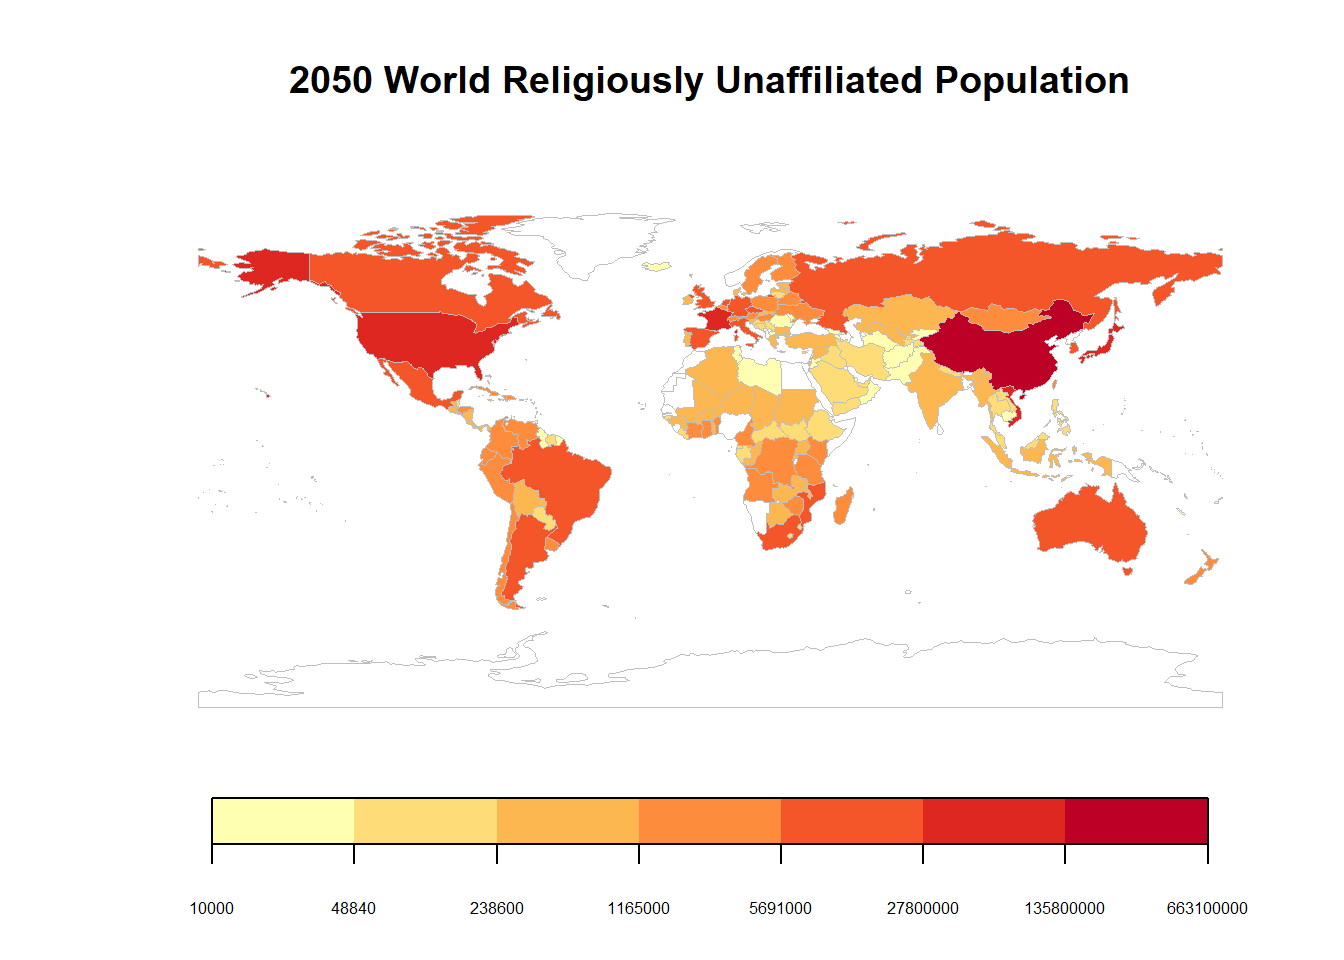 Country Heat Map of Religious Unaffiiated Population in 2050